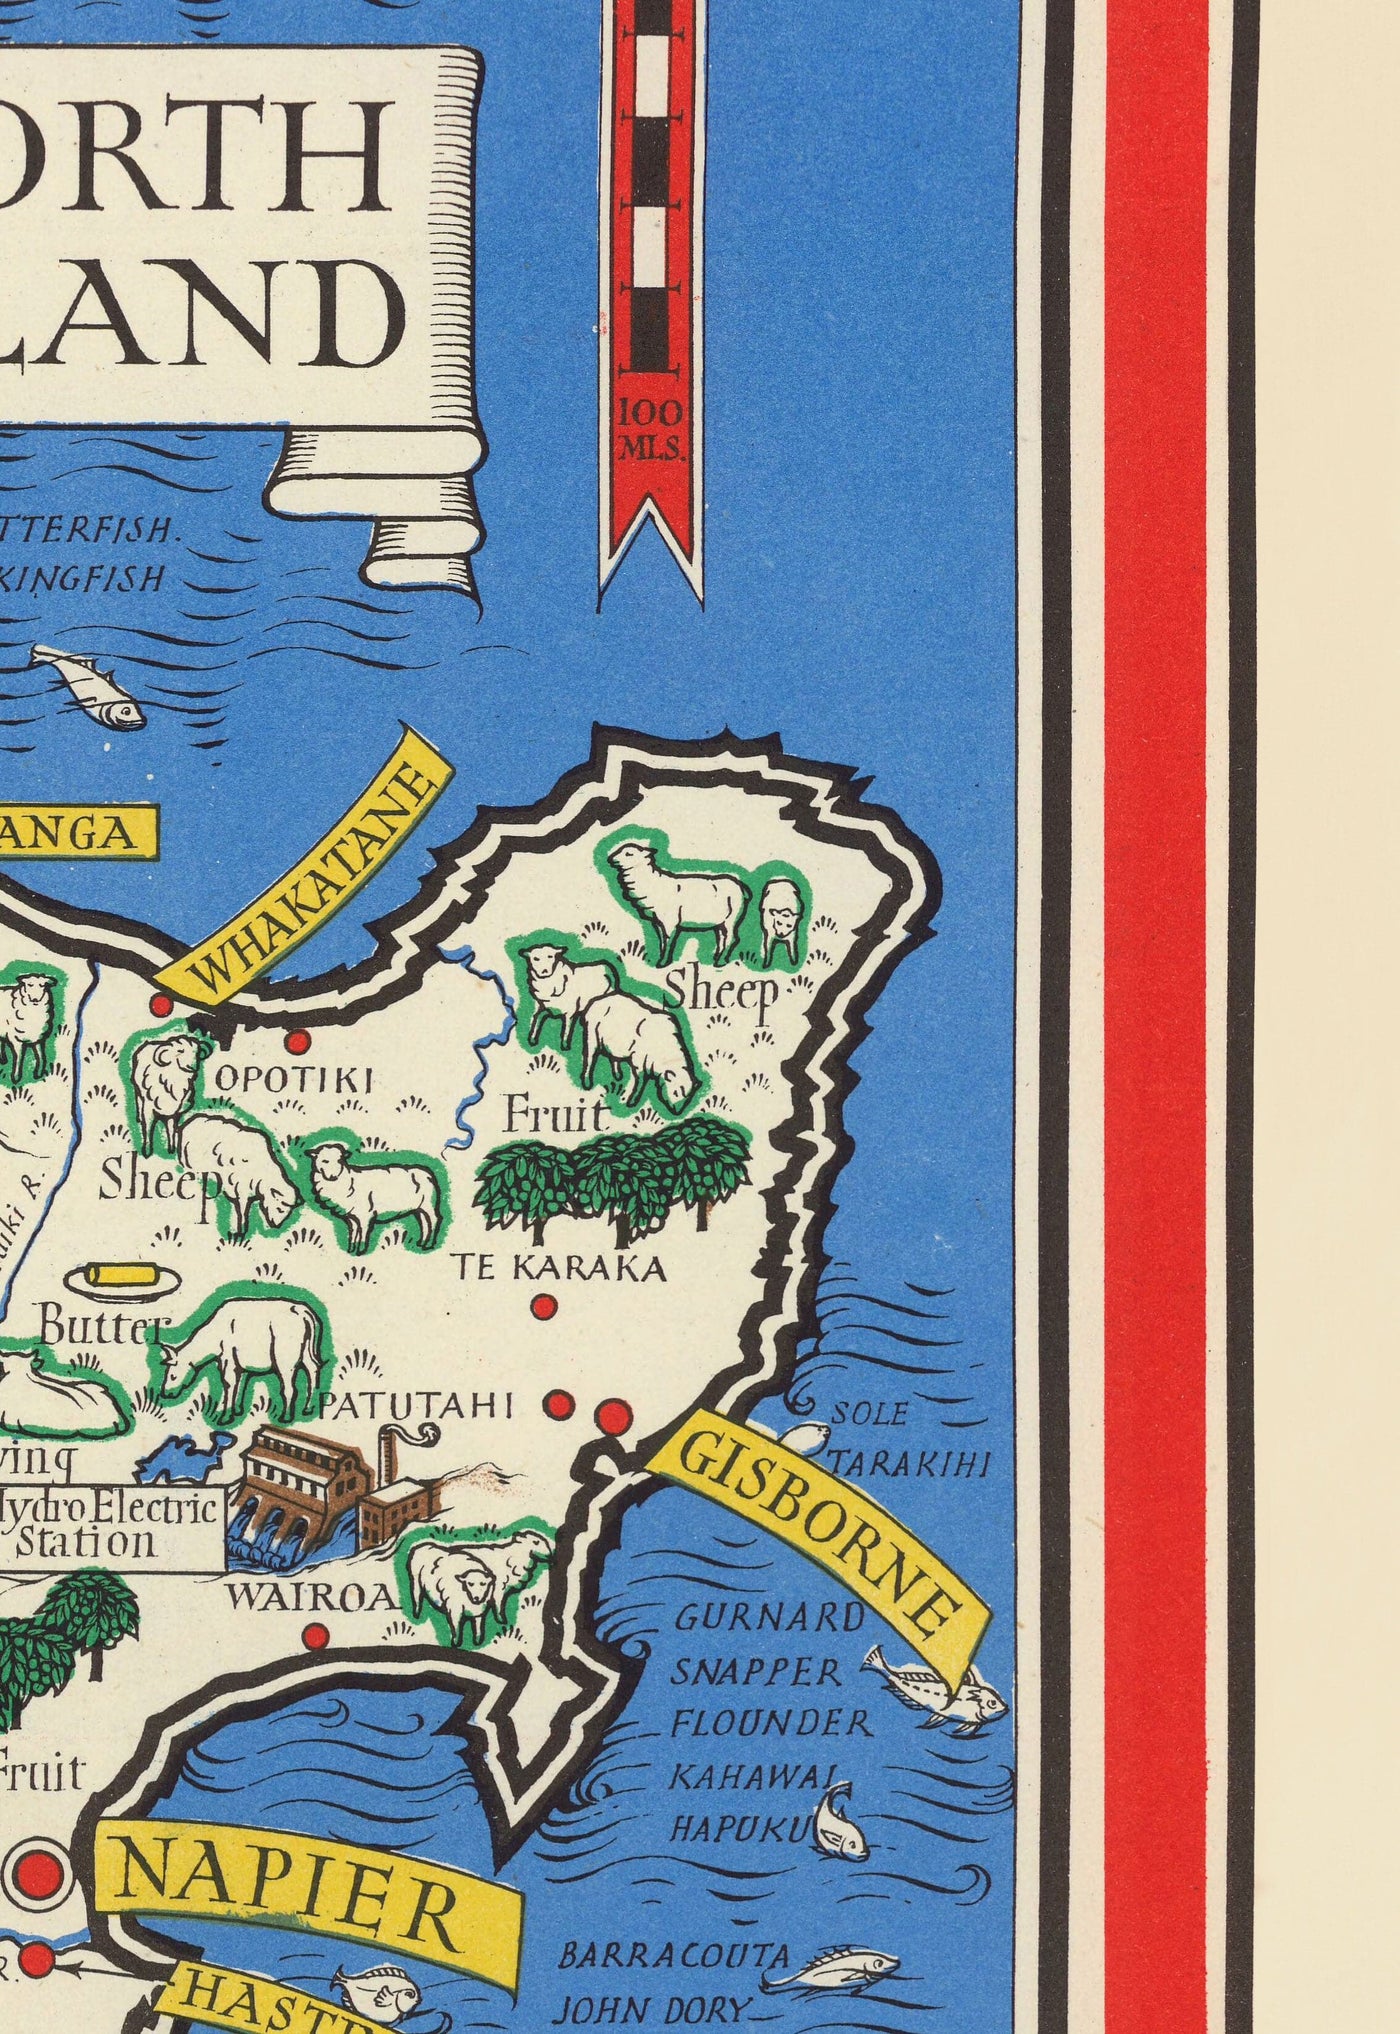 Old Map of New Zealand, 1943 by Max Gill - Colonial British Empire World War 2 Map